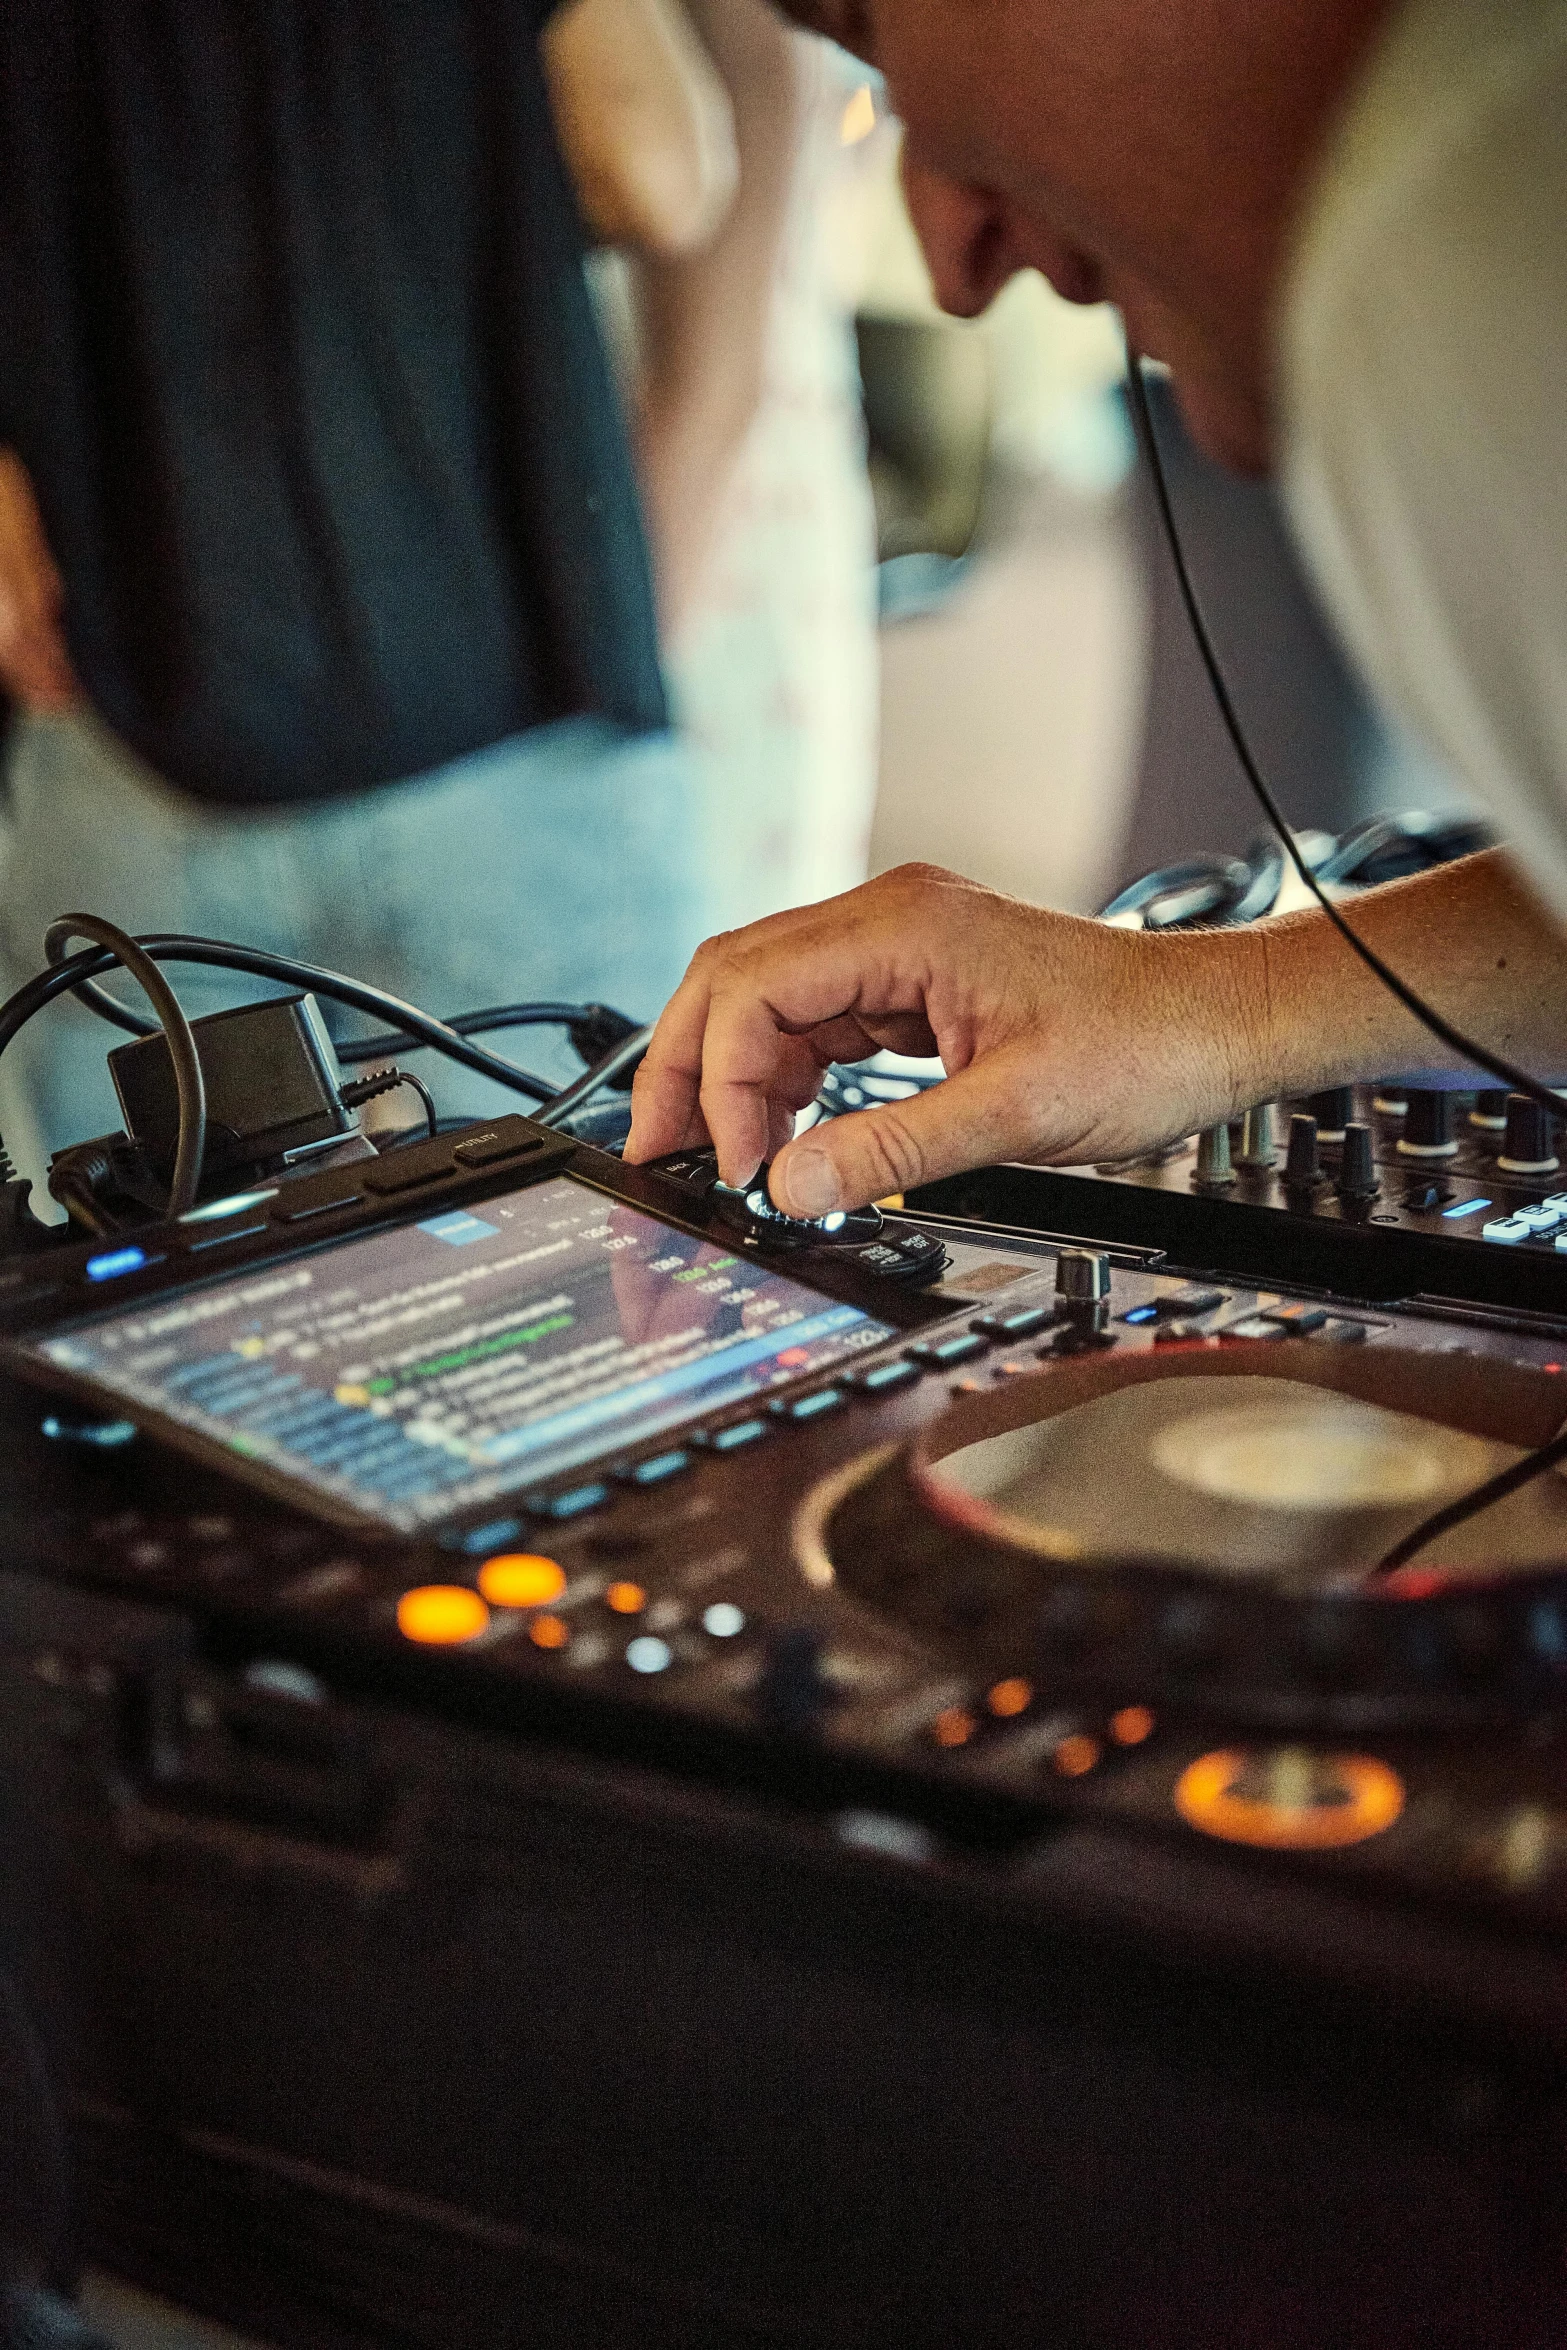 a man working on the equipment at a dj mixing